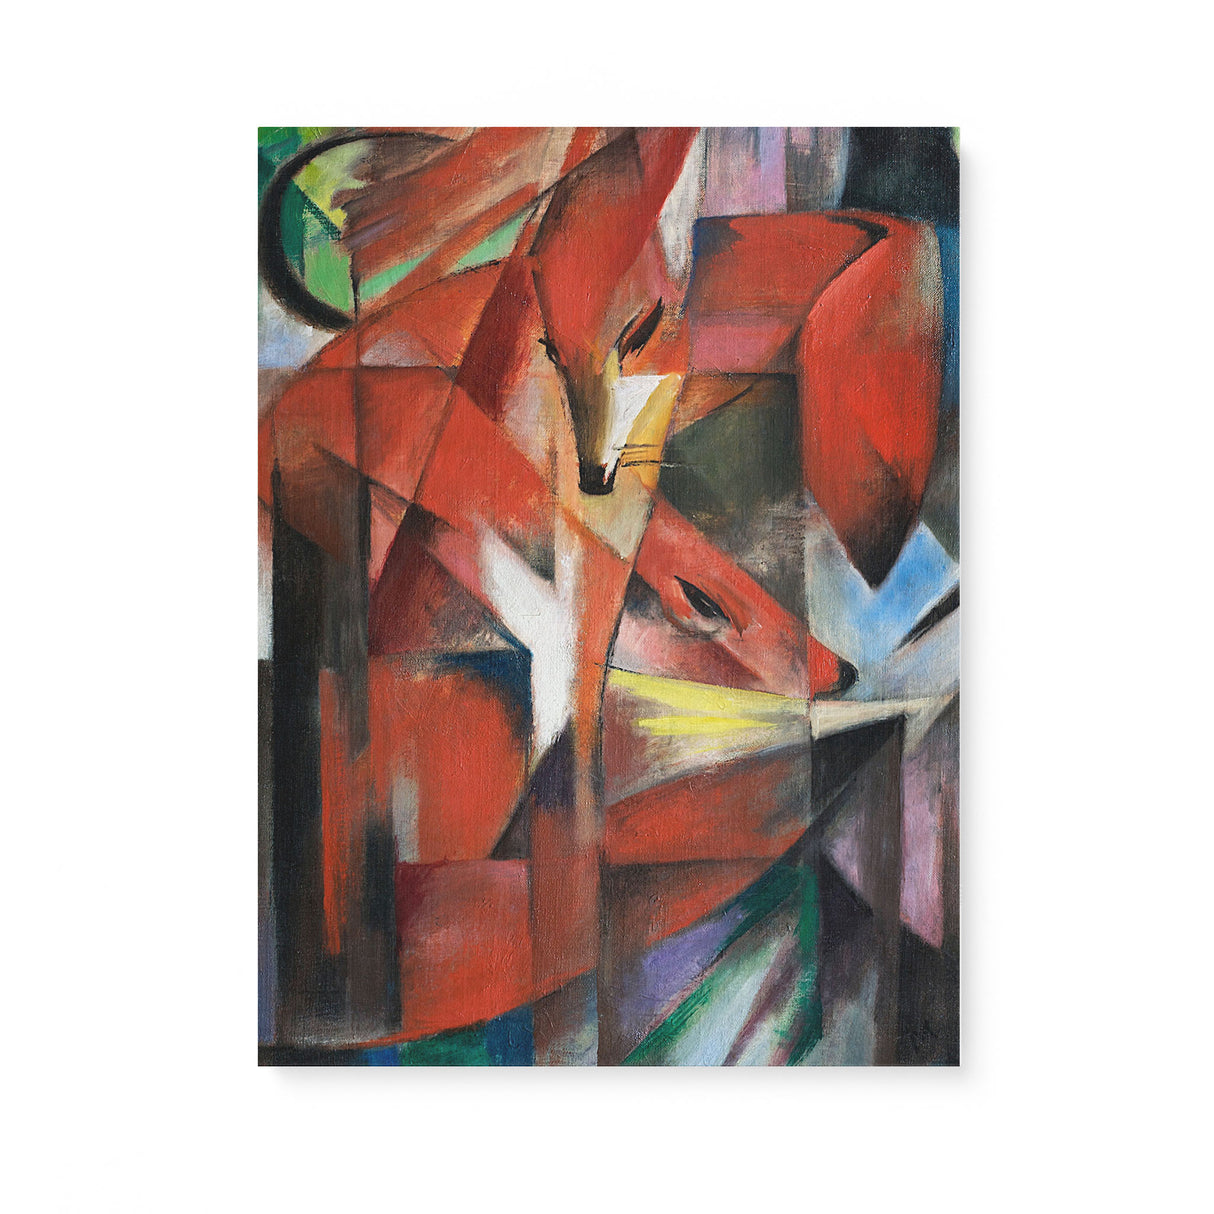 "The Foxes" Canvas Print by Franz Marc (1913) Canvas Wall Art Sckribbles   